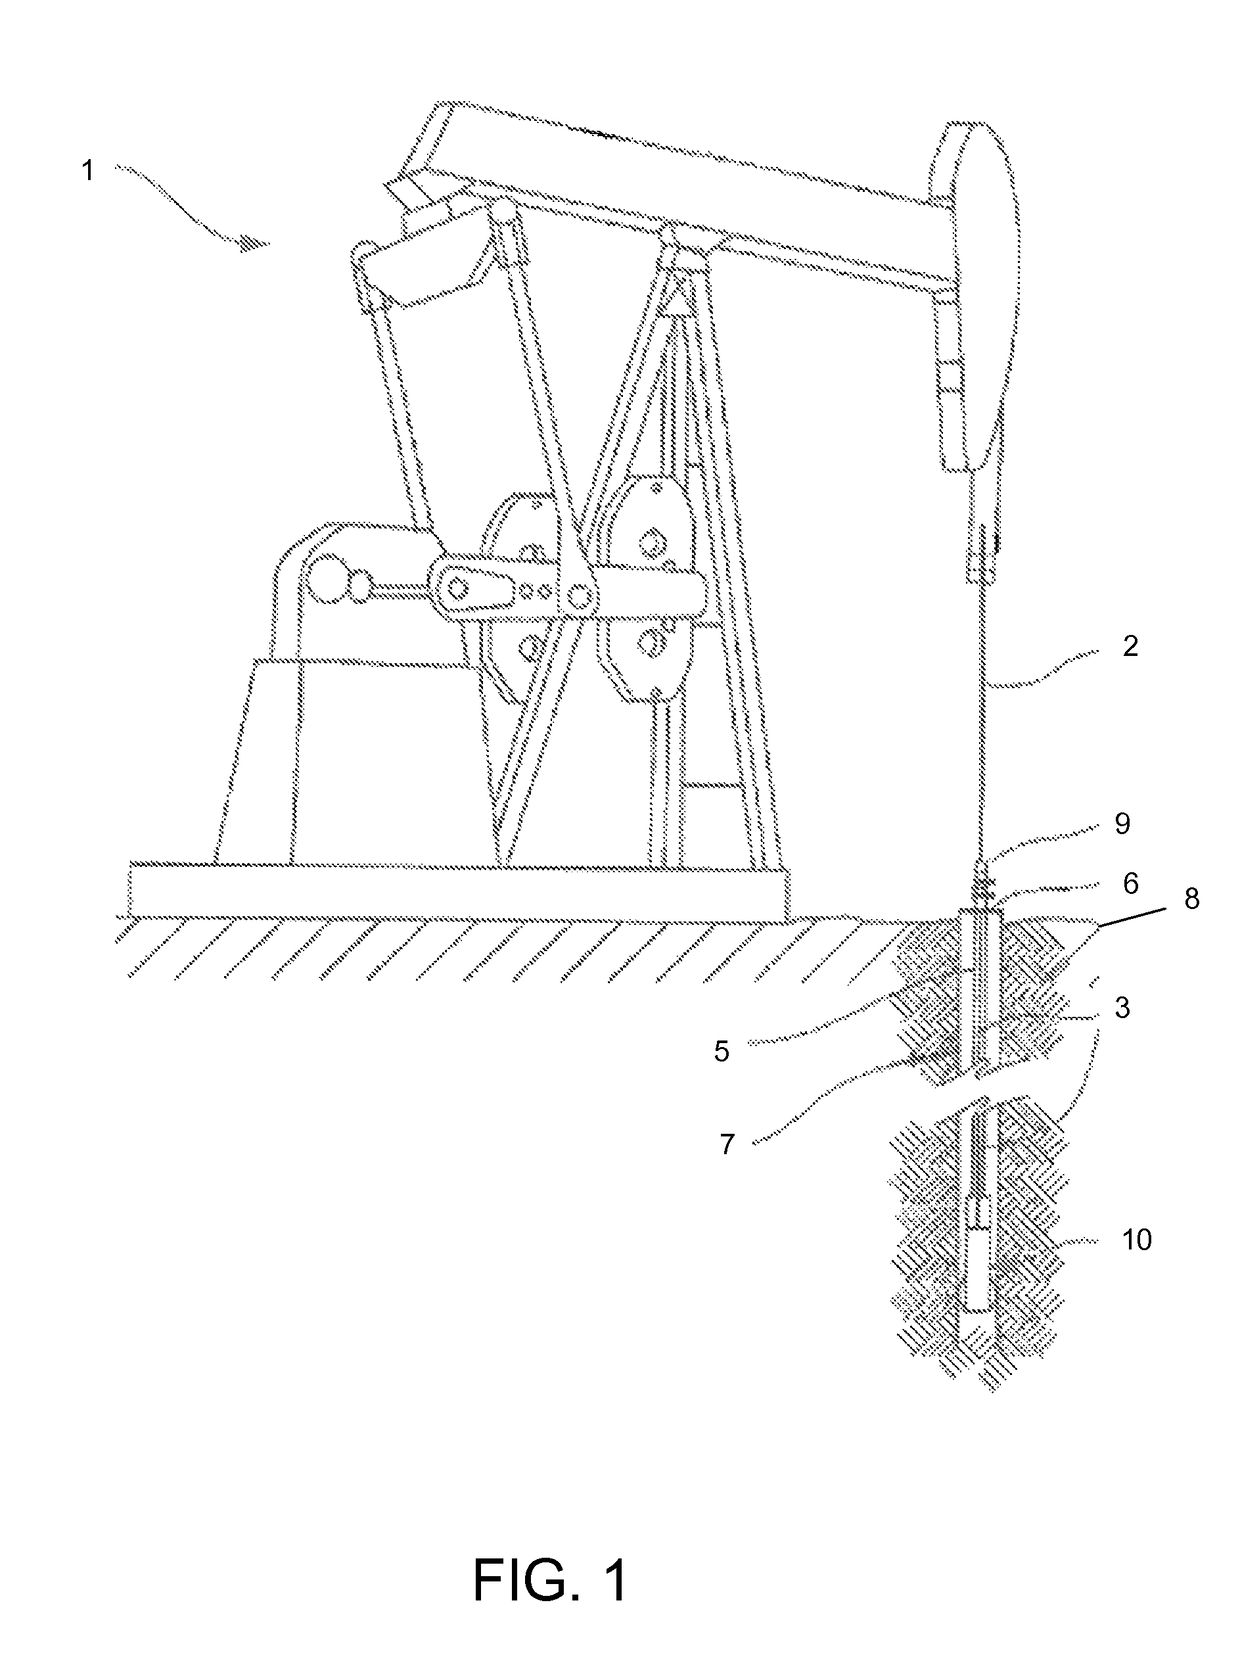 Low slip plunger for oil well production operations